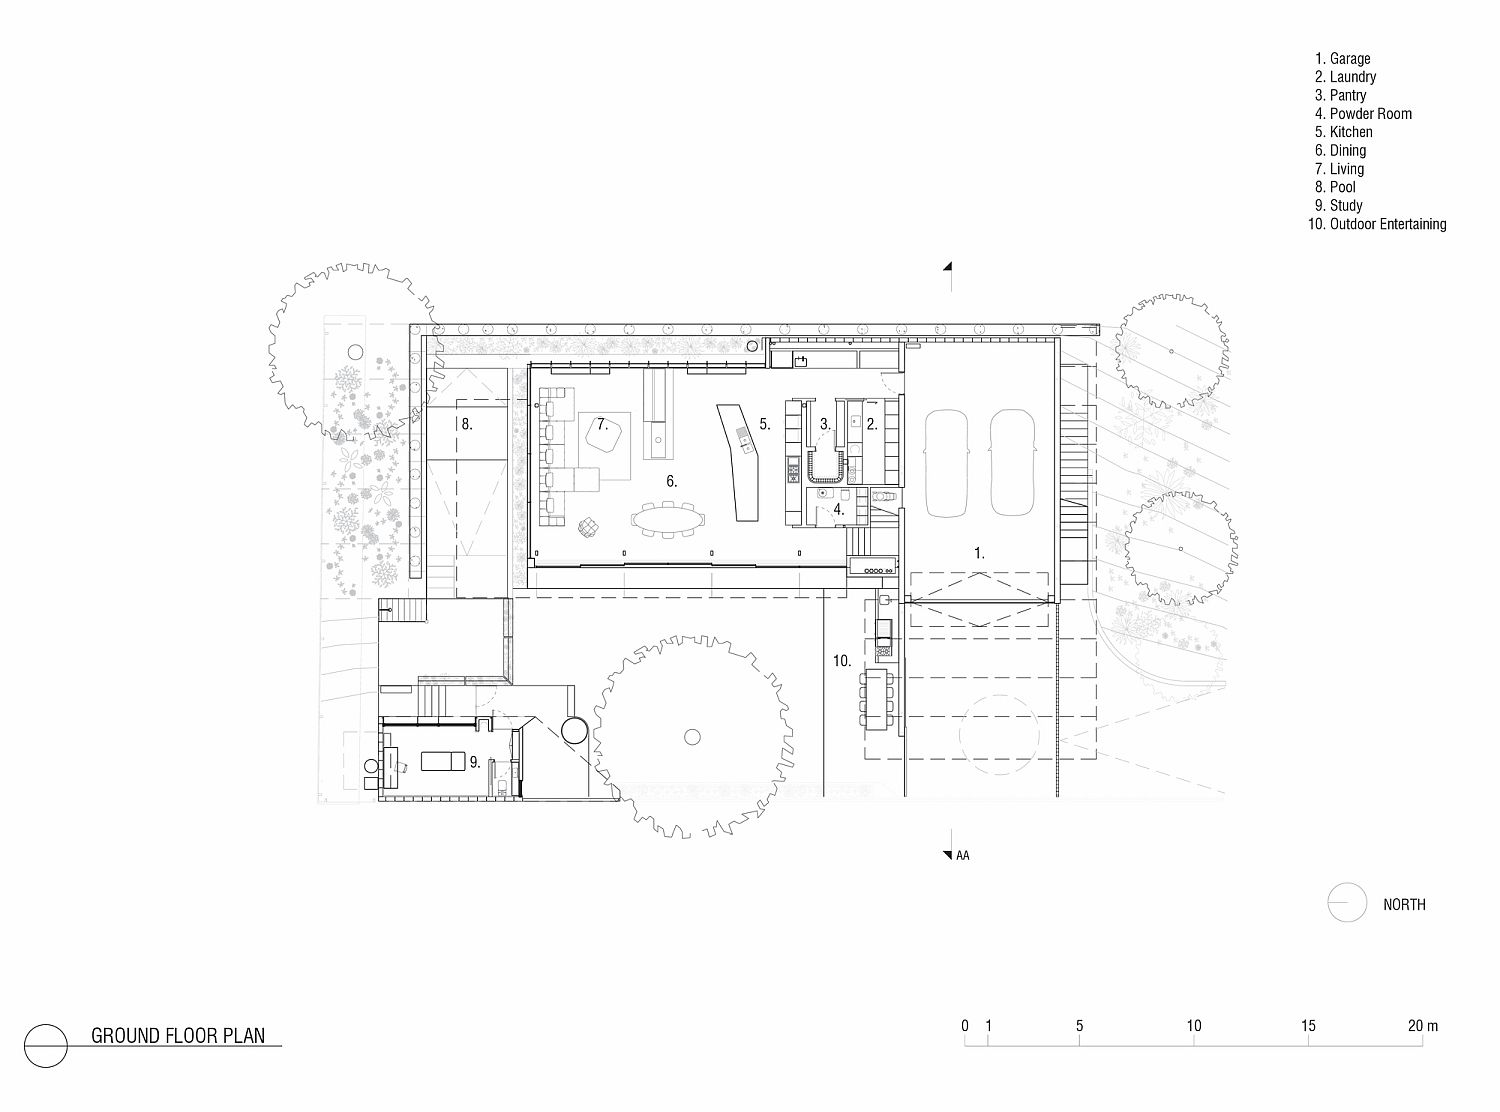 Ground floor plan of the Studley Park House in Melbourne